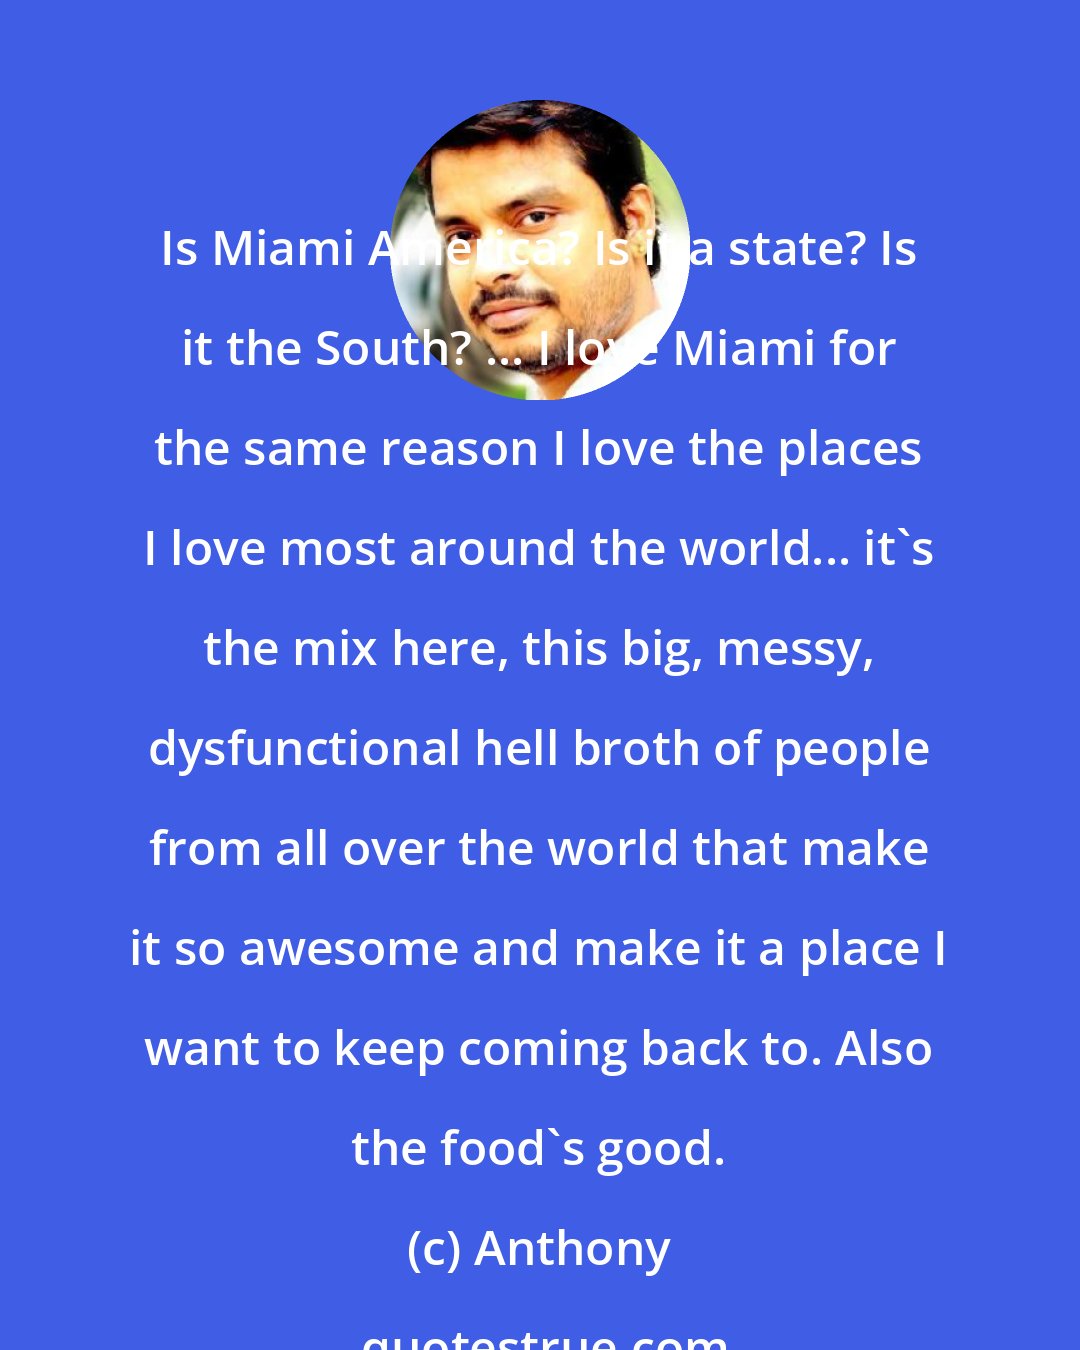 Anthony: Is Miami America? Is it a state? Is it the South? ... I love Miami for the same reason I love the places I love most around the world... it's the mix here, this big, messy, dysfunctional hell broth of people from all over the world that make it so awesome and make it a place I want to keep coming back to. Also the food's good.